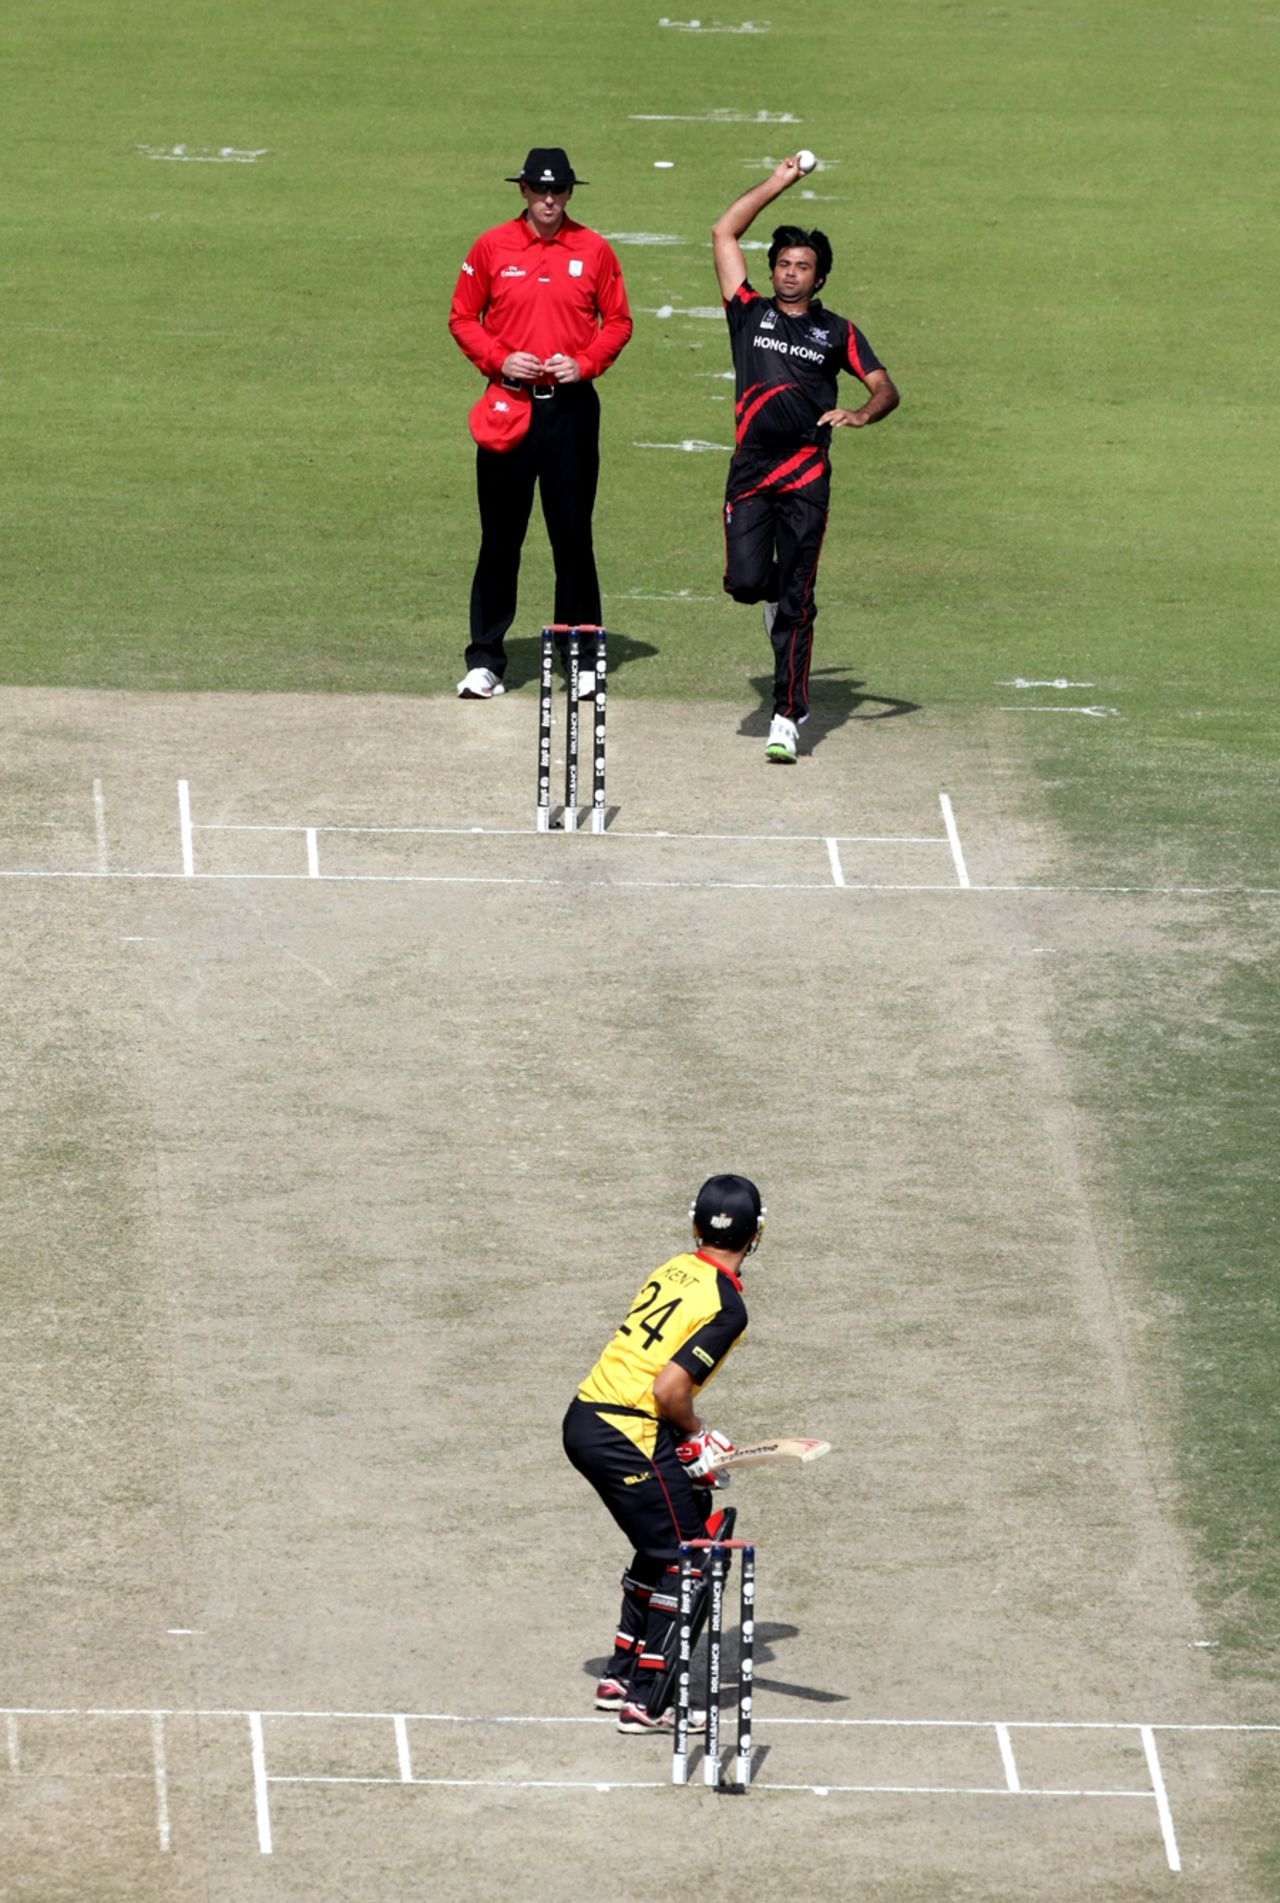 Haseeb Amjad bowling during the Papua New Guinea v Hong Kong Qualifying Play-off match at the ICC World Twenty20 Qualifiers at the Zayed Cricket Stadium on November 28, 2013 in Abu Dhabi, United Arab Emirates. (Photo by Graham Crouch-IDI/IDI via Getty Images)